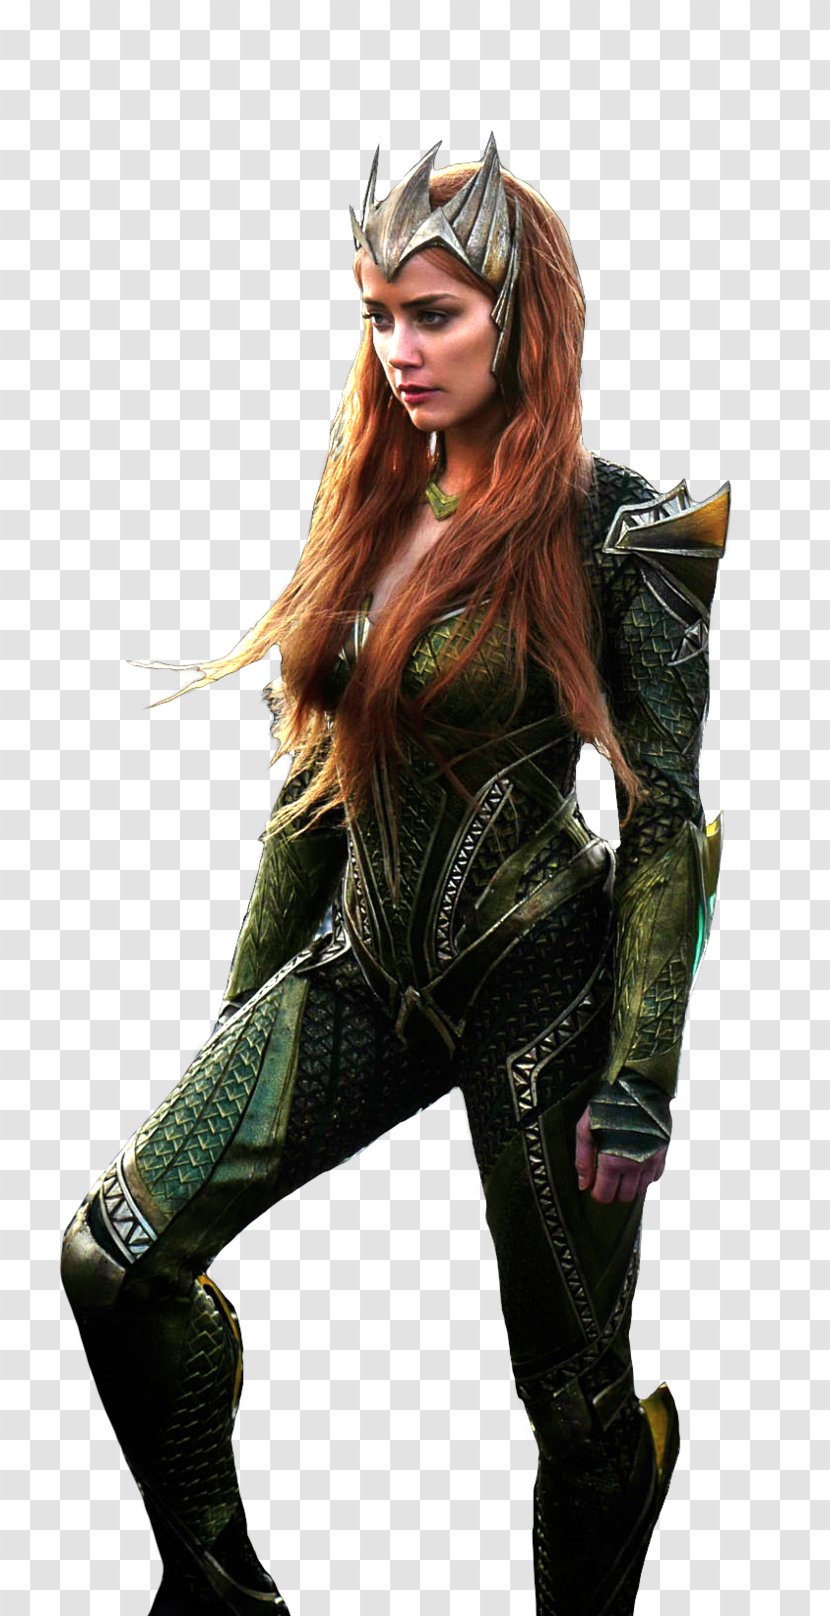 Costume Character Fiction - Amber Heard File Transparent PNG